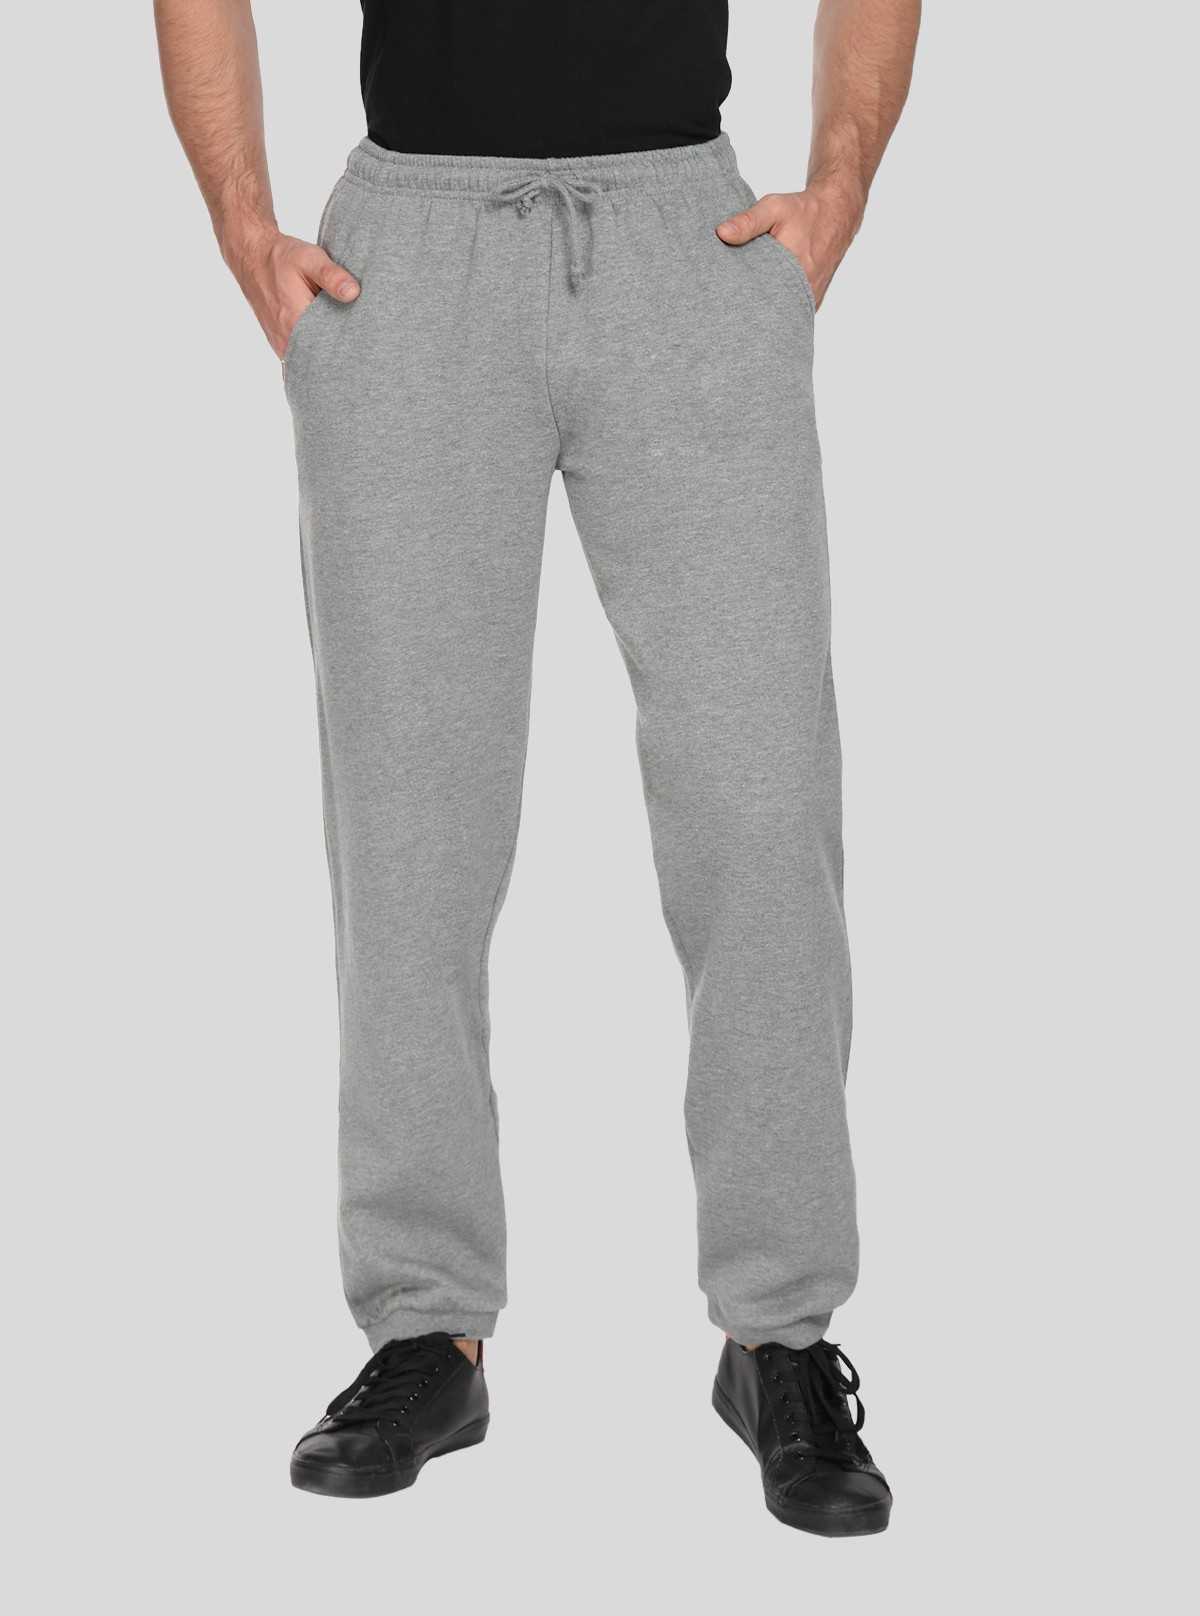 Grey Melange Cuffed Jogger Boer and Fitch - 1